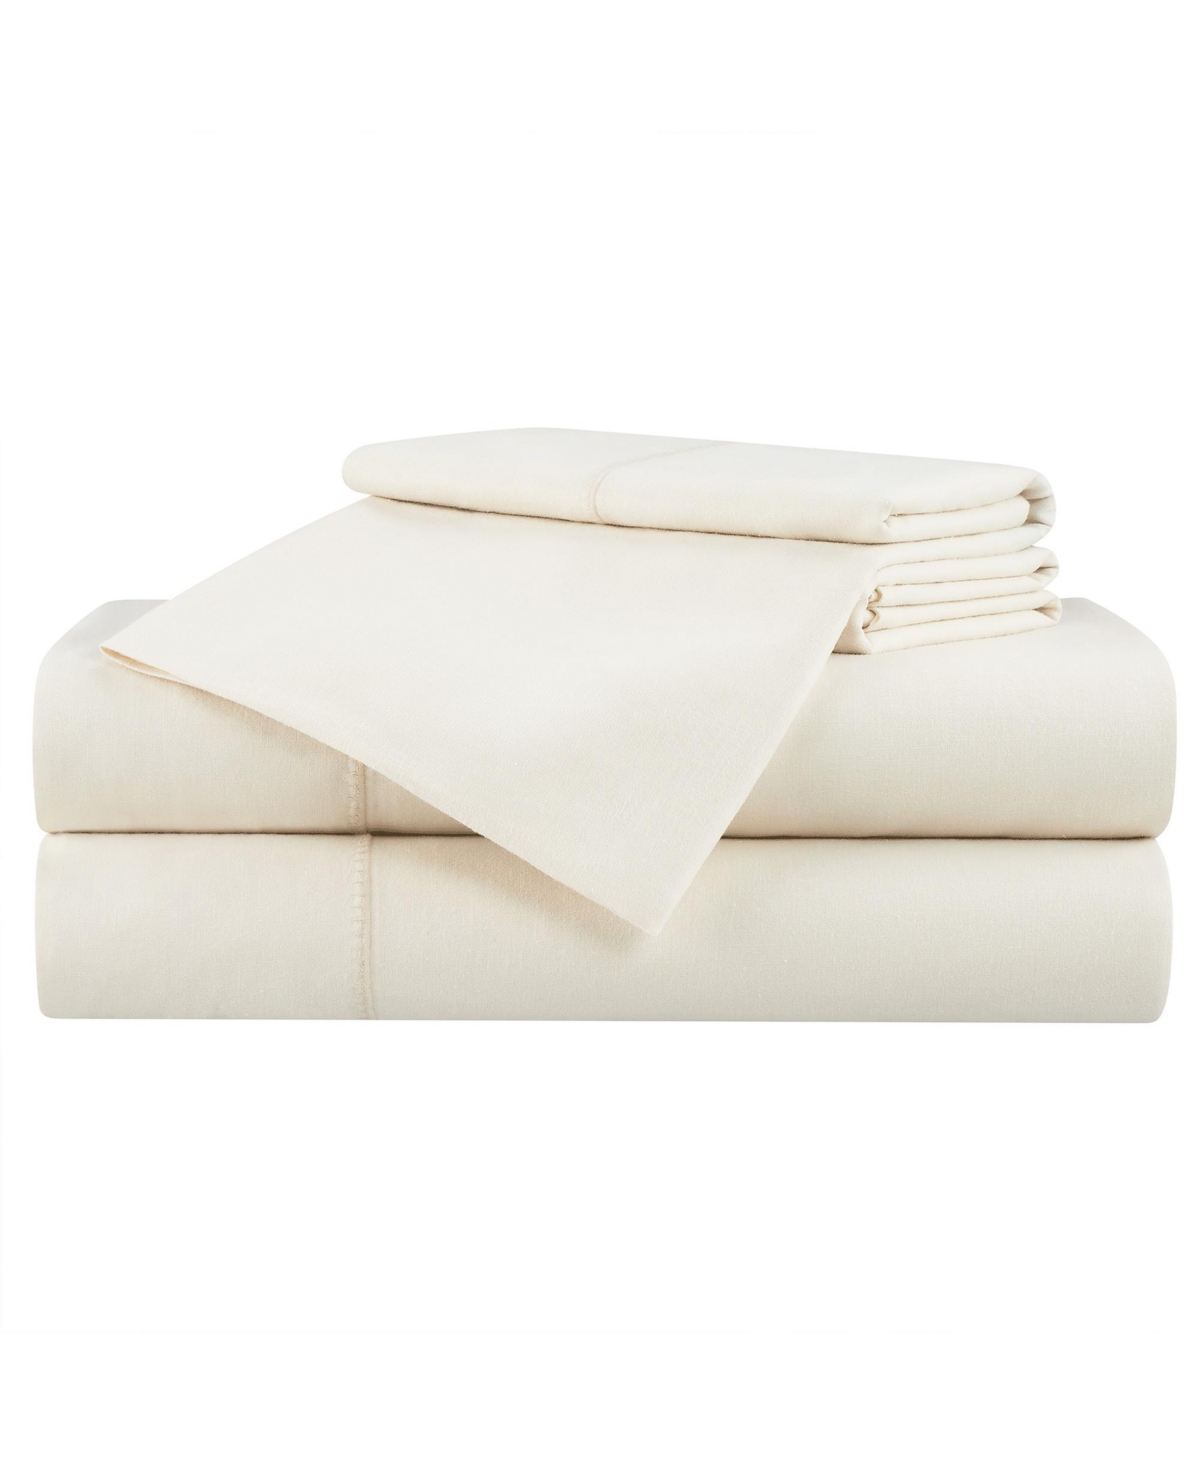 Aston And Arden Linen And Eucalyptus Lyocell Queen Sheet Set, 1 Flat Sheet, 1 Fitted Sheet, 2 Pillowcases, Classic L In Cream